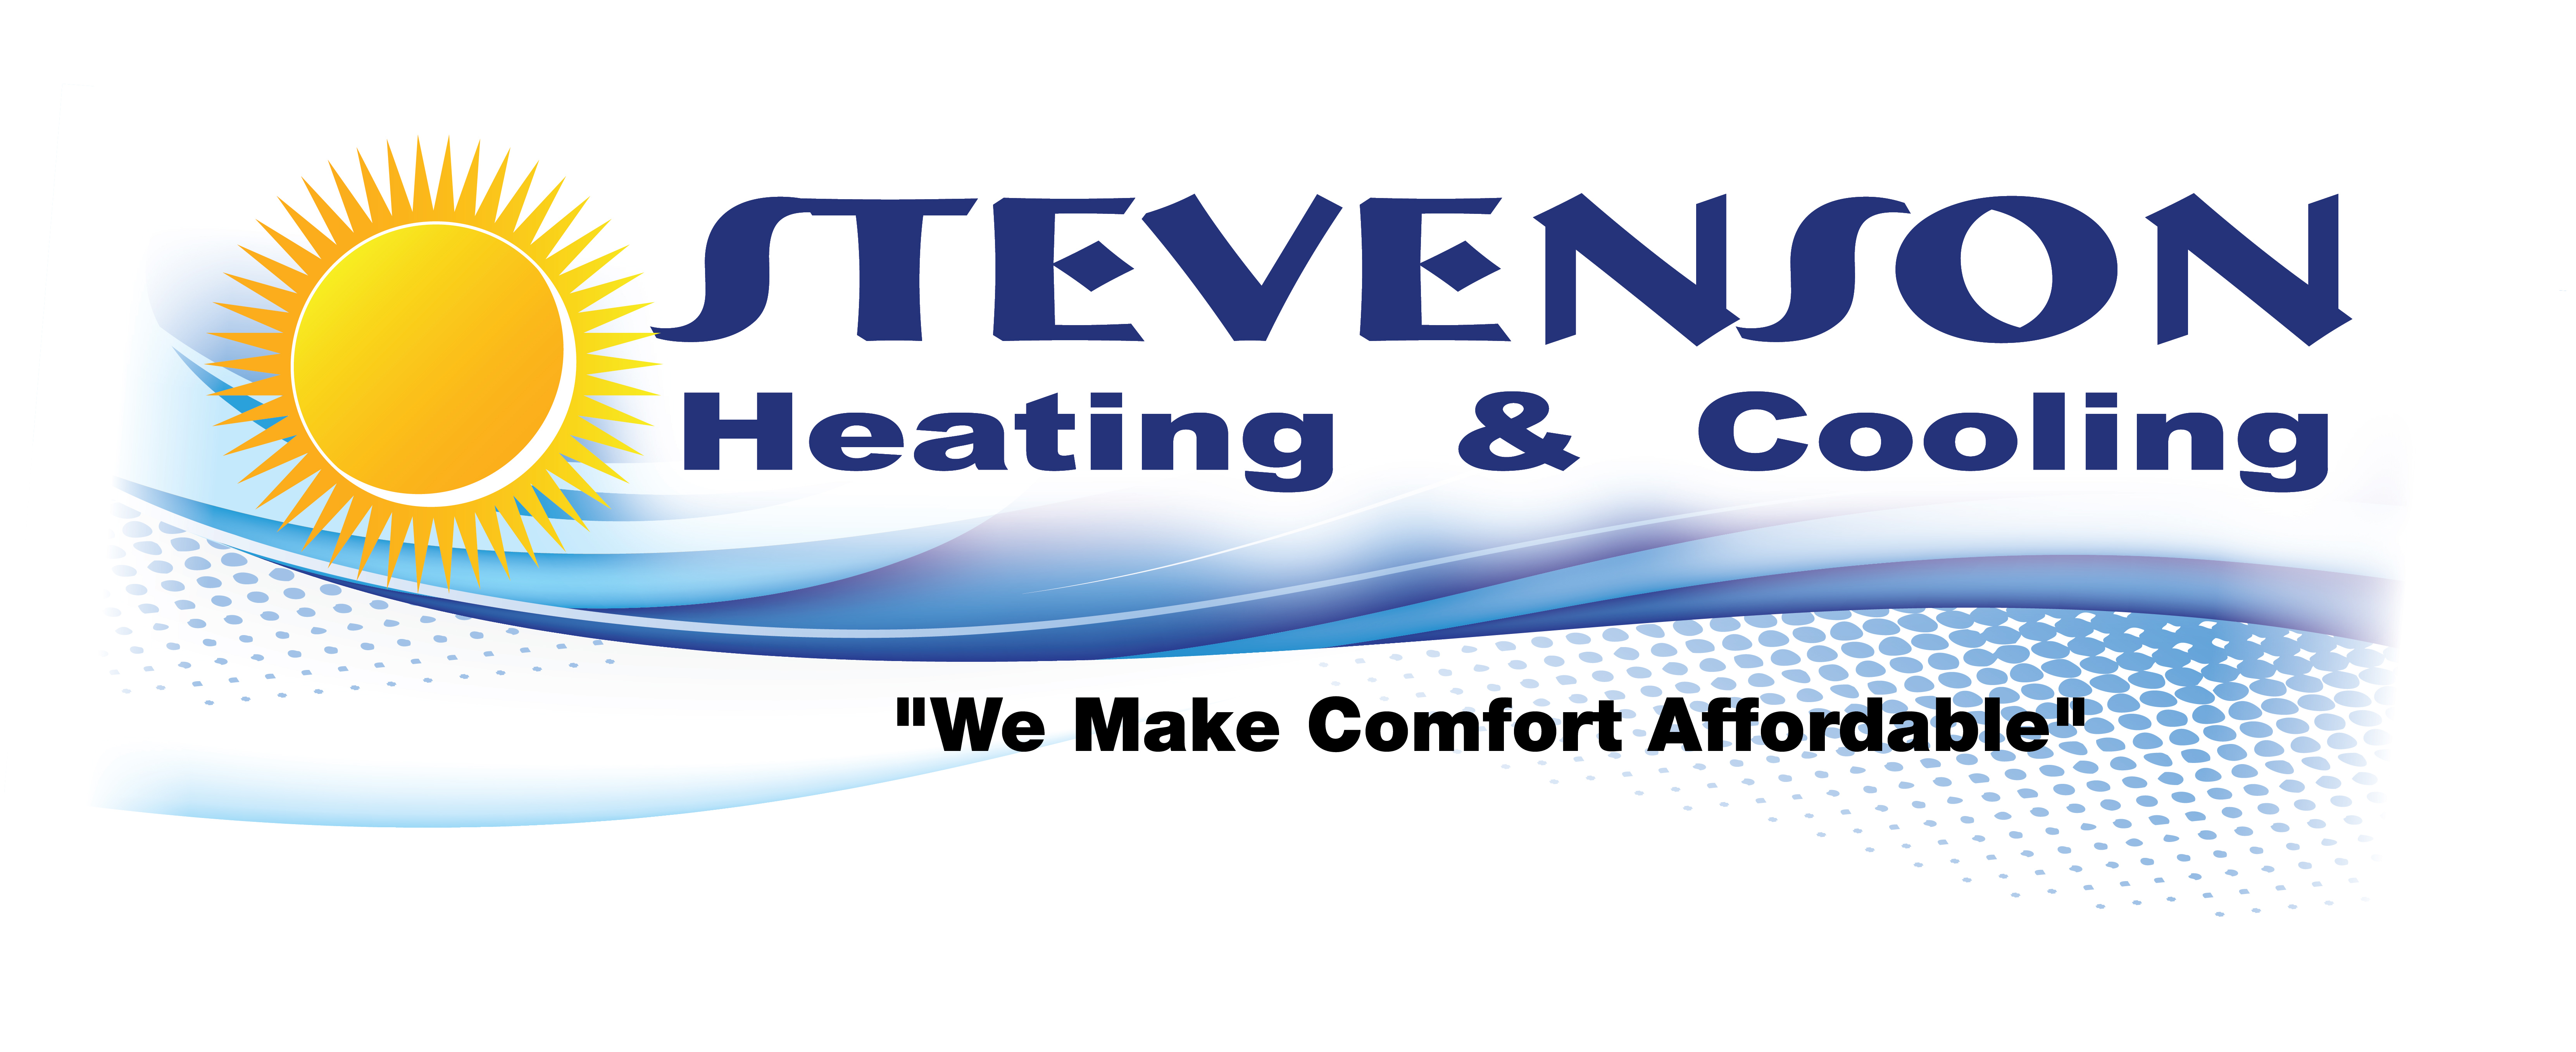 Stevenson Heating And Cooling